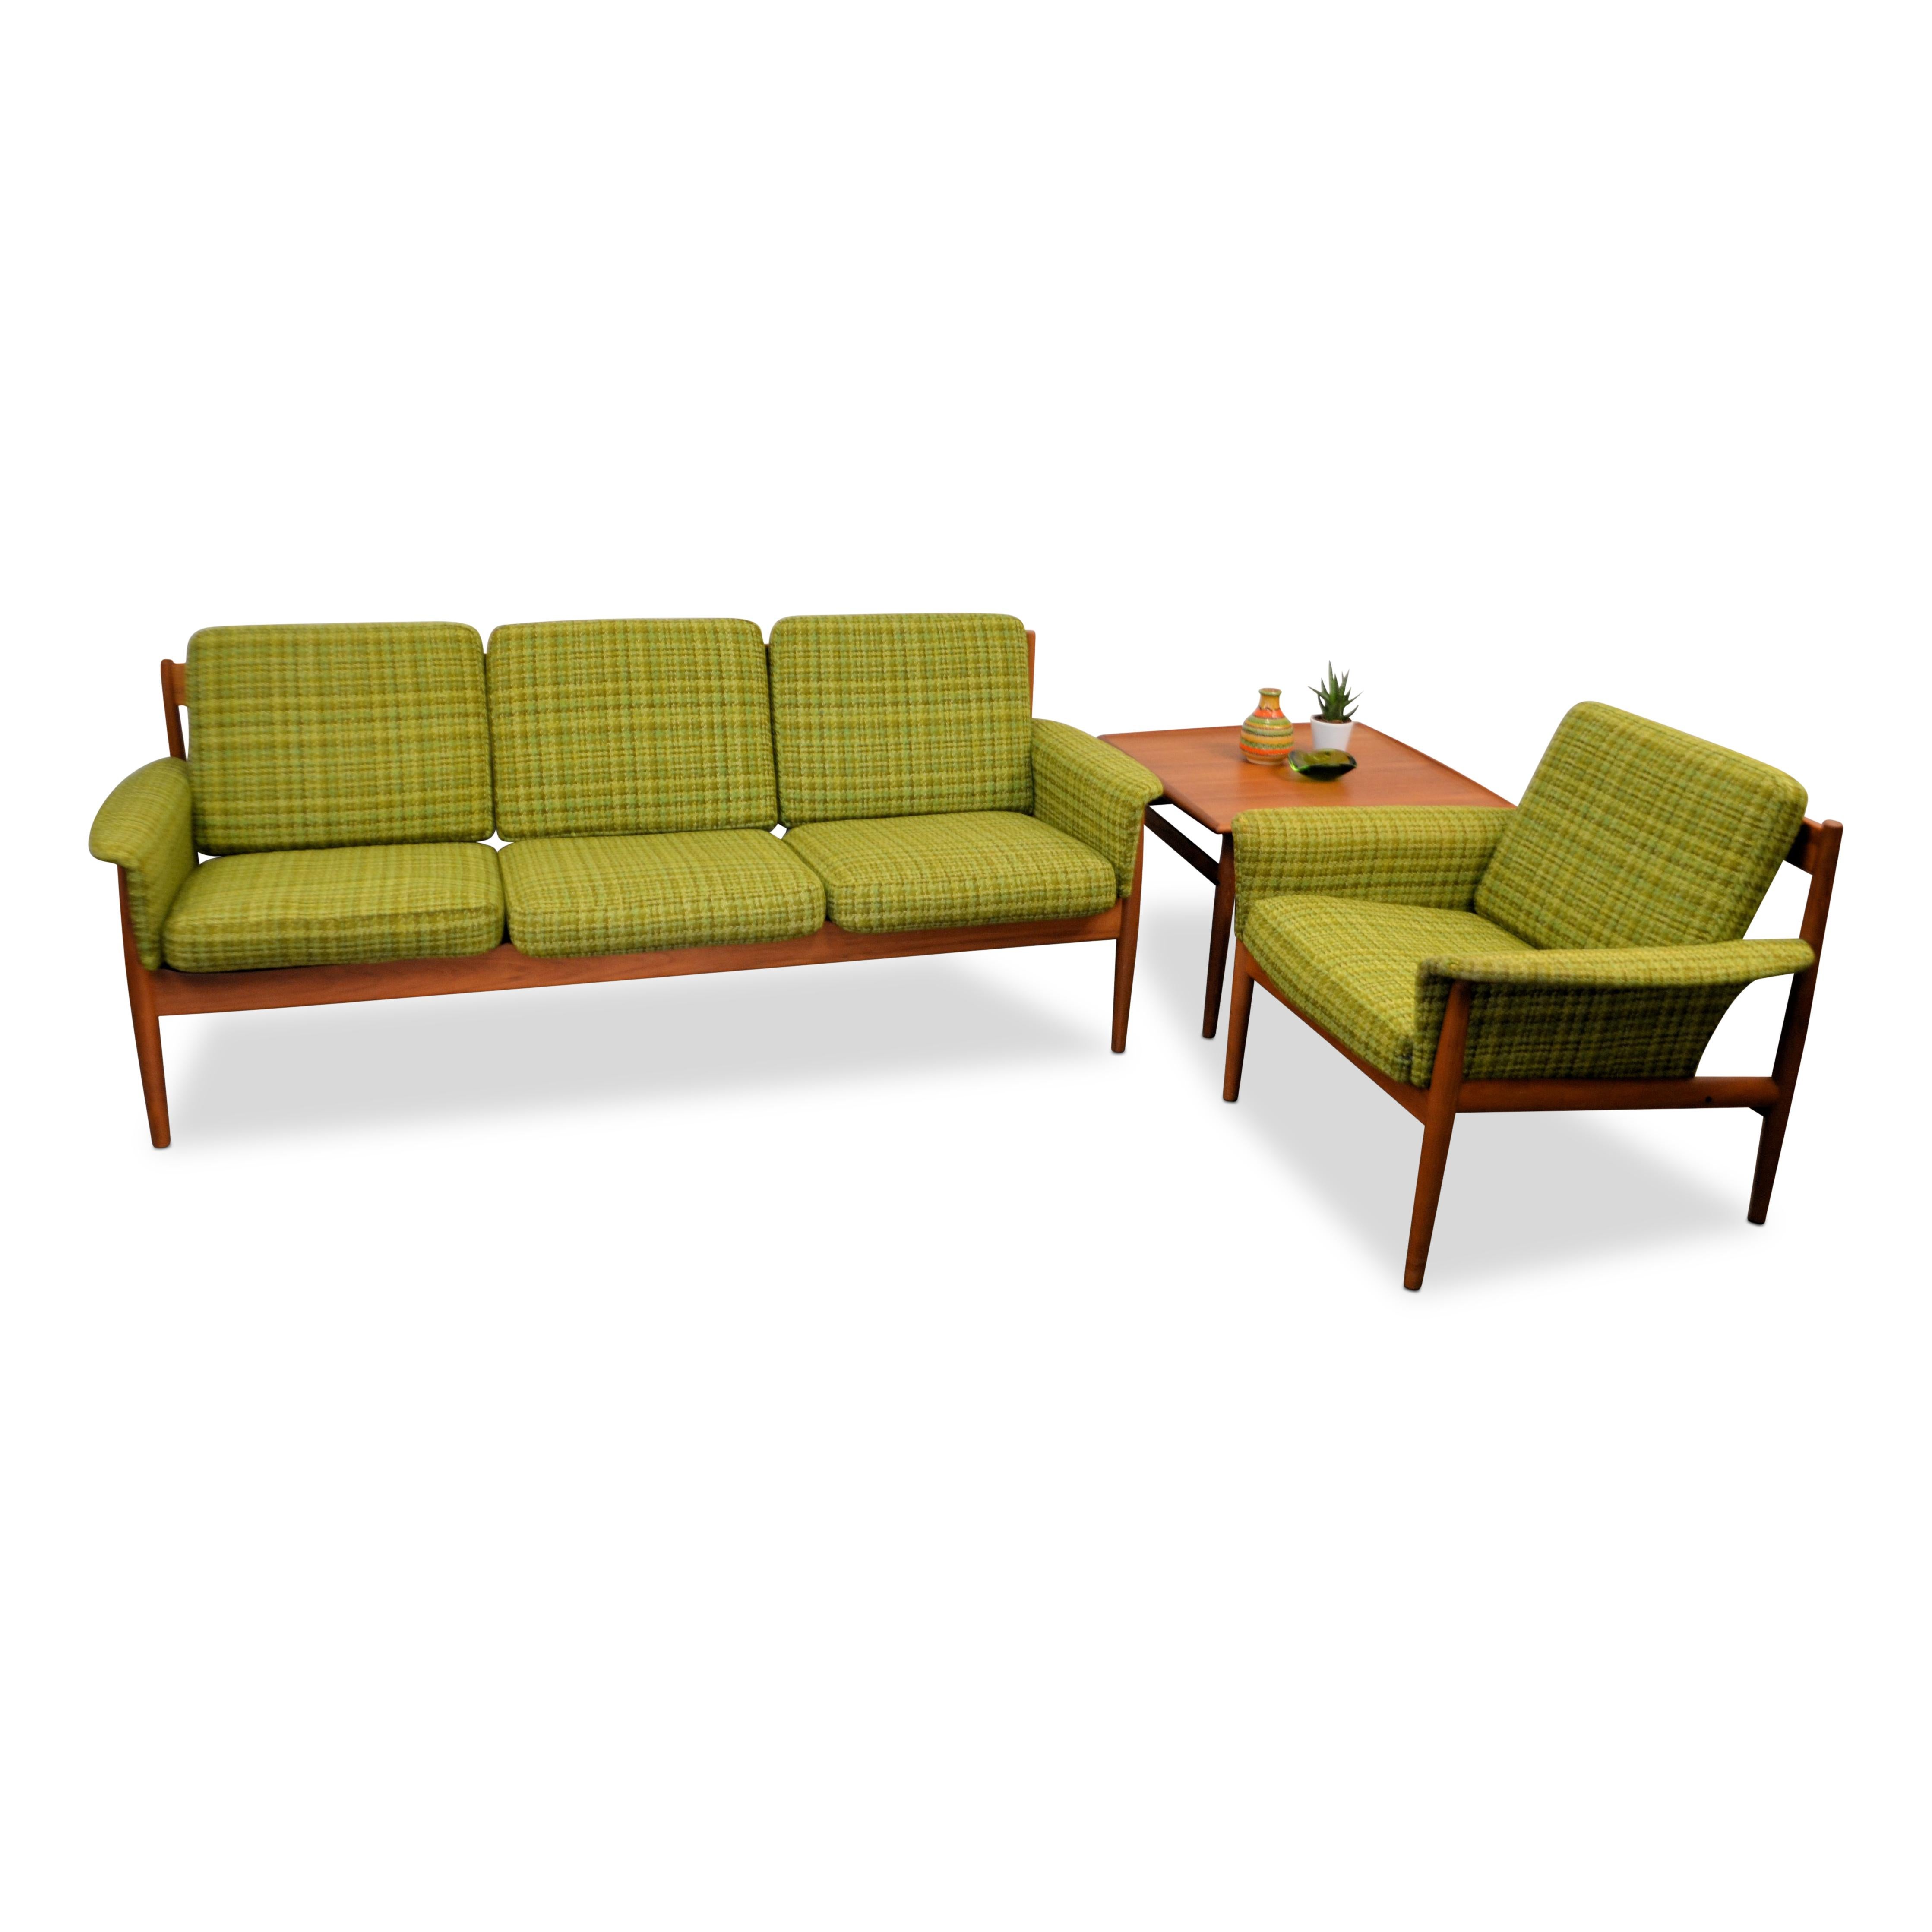 Vintage seating group consisting of a three-seat sofa, a lounge chair and side table in solid teak. Designed by Danish top designer Grete Jalk for France & Son. Grete Jalk was a driving force behind the global Expansion of Danish Design. Her simple